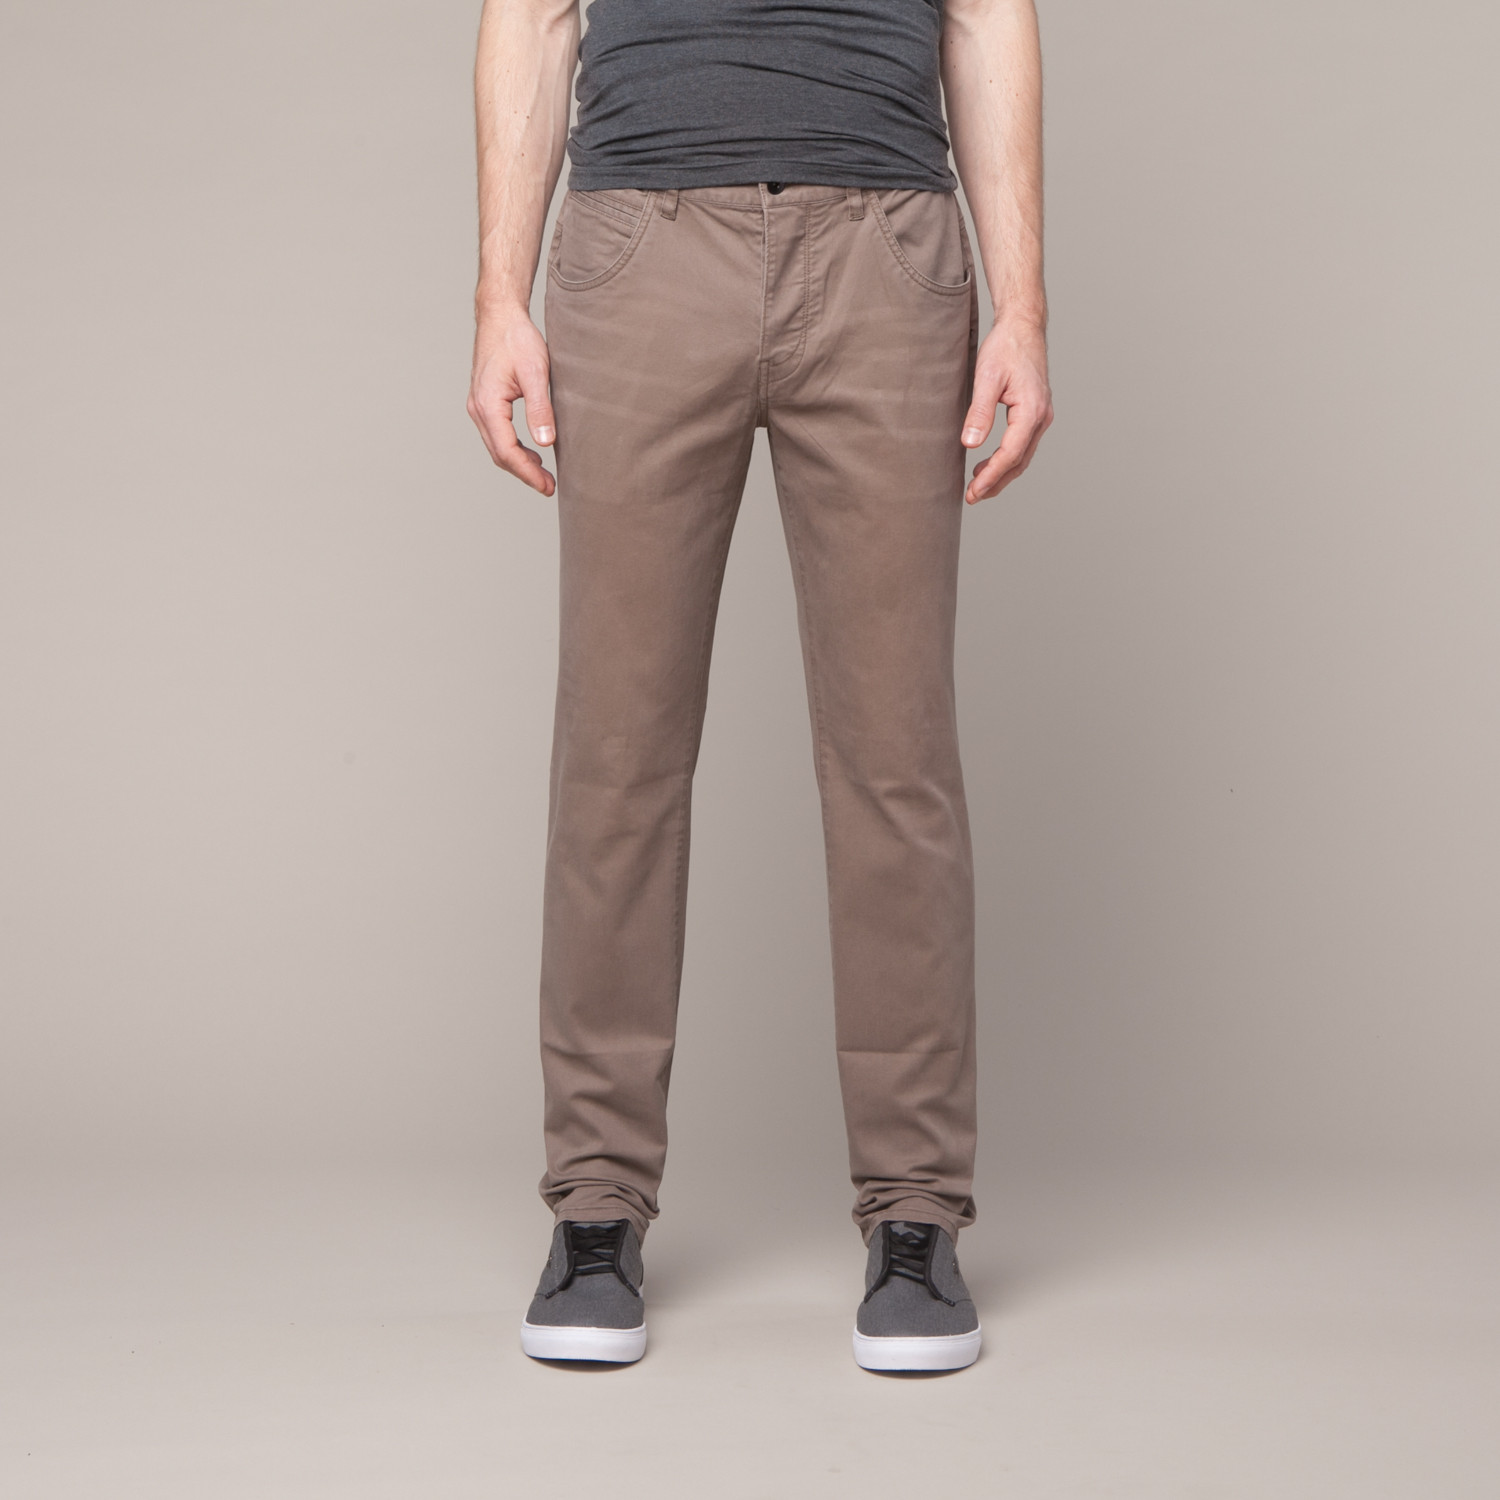 Logan Slim Straight // Moss Washed (29WX31.5L) - OPNK - Touch of Modern